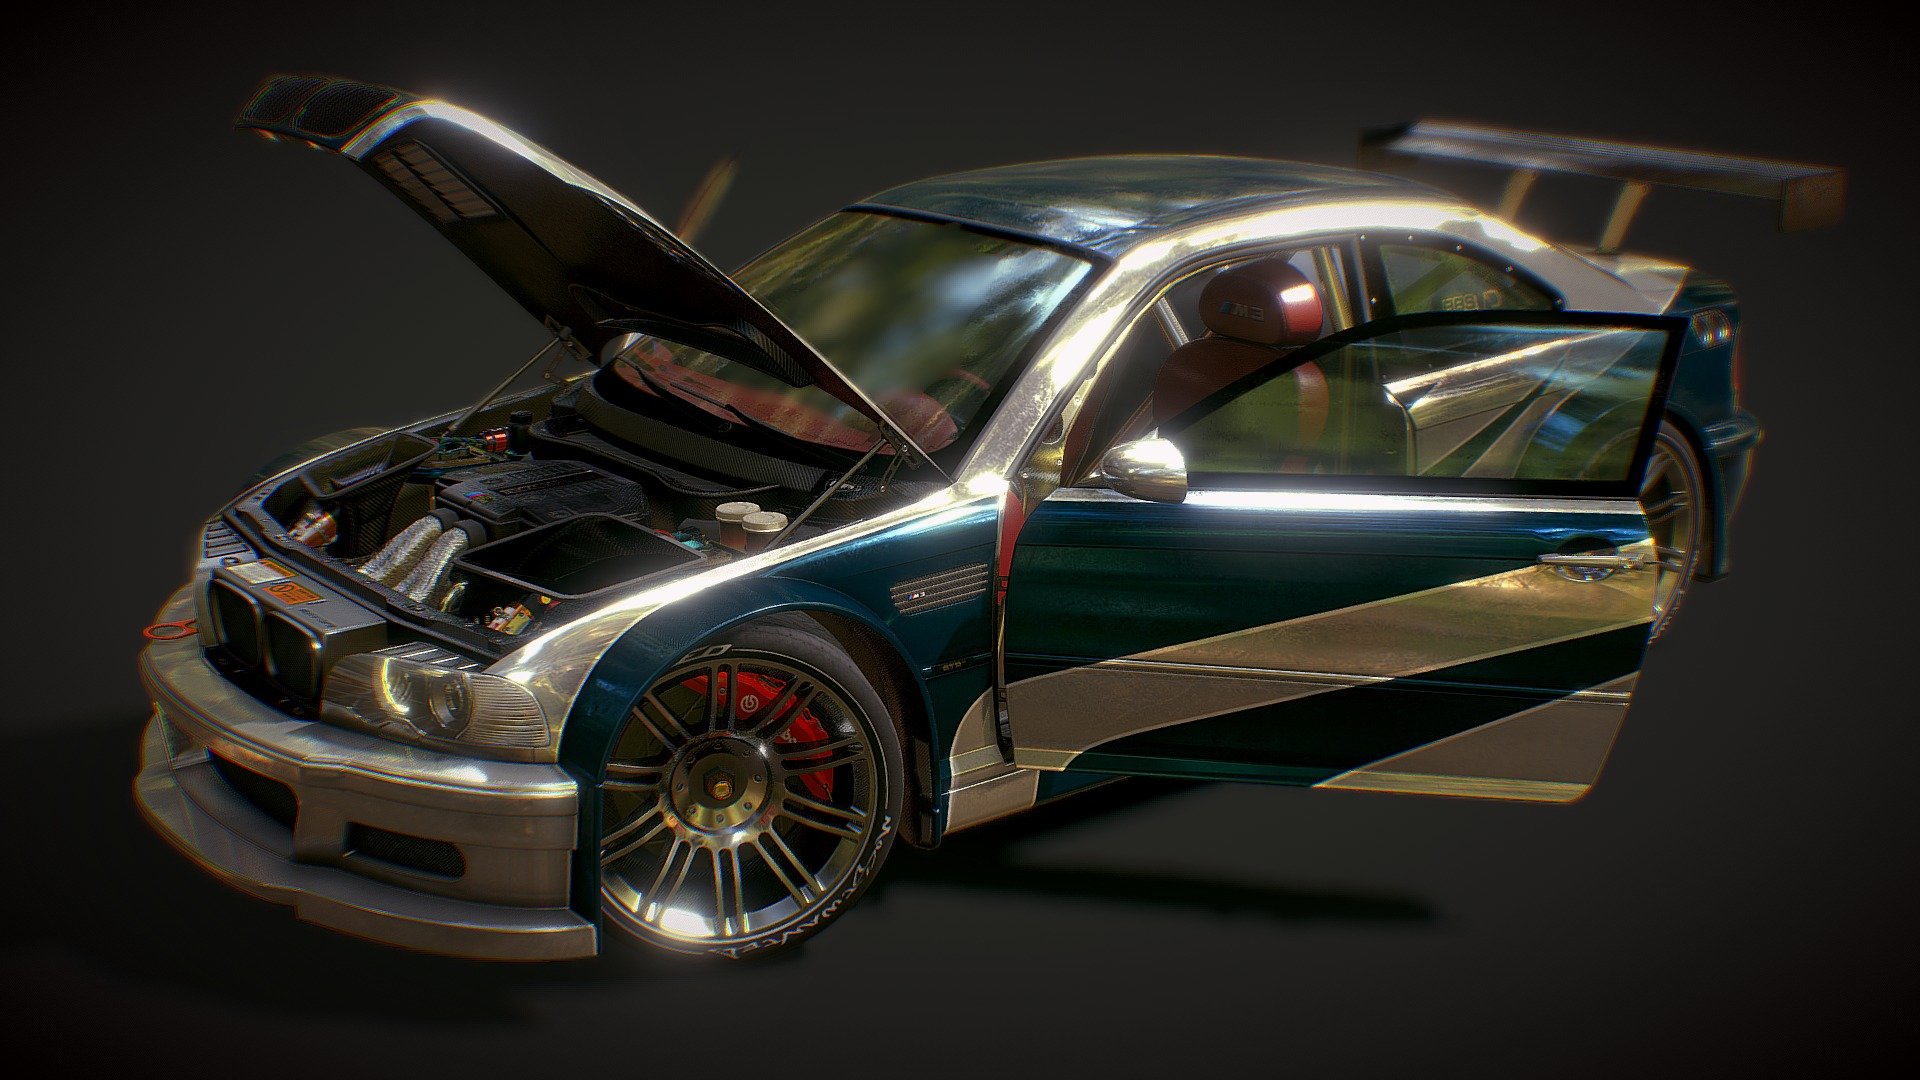 BMW M3 GTR - E46 (Need for Speed - Mostwanted) - Mid Poly - With Interior &amp; Engine
UV Mapped / Shadder Split / PBR Textured
Game Ready / Unreal Engine / Unity - Directly import with texture maps and start using.
Contact me if you want the non triangulated version or 4k textures of this model - dsaalister@gmail.com
https://www.instagram.com/p/Cdnk5jajFgl/?hl=en - BMW M3 GTR - E46 (Need for Speed - Mostwanted) - Buy Royalty Free 3D model by Allay Design (@Alister.Dsa) 3d model